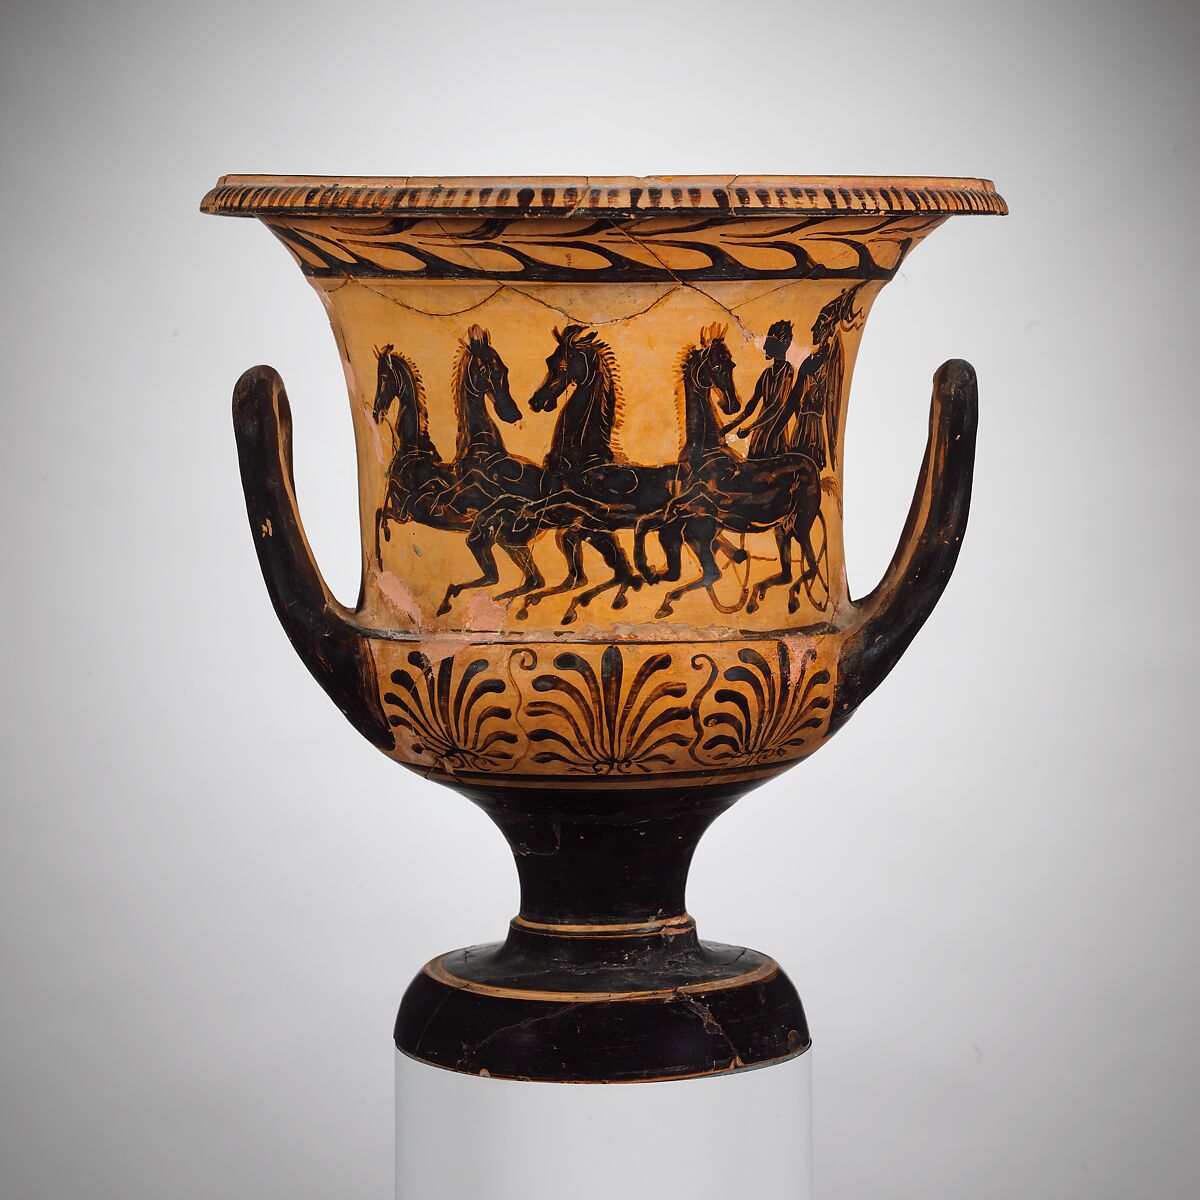 Terracotta calyx-krater (bowl for mixing wine and water), Terracotta, Greek, Boeotian 